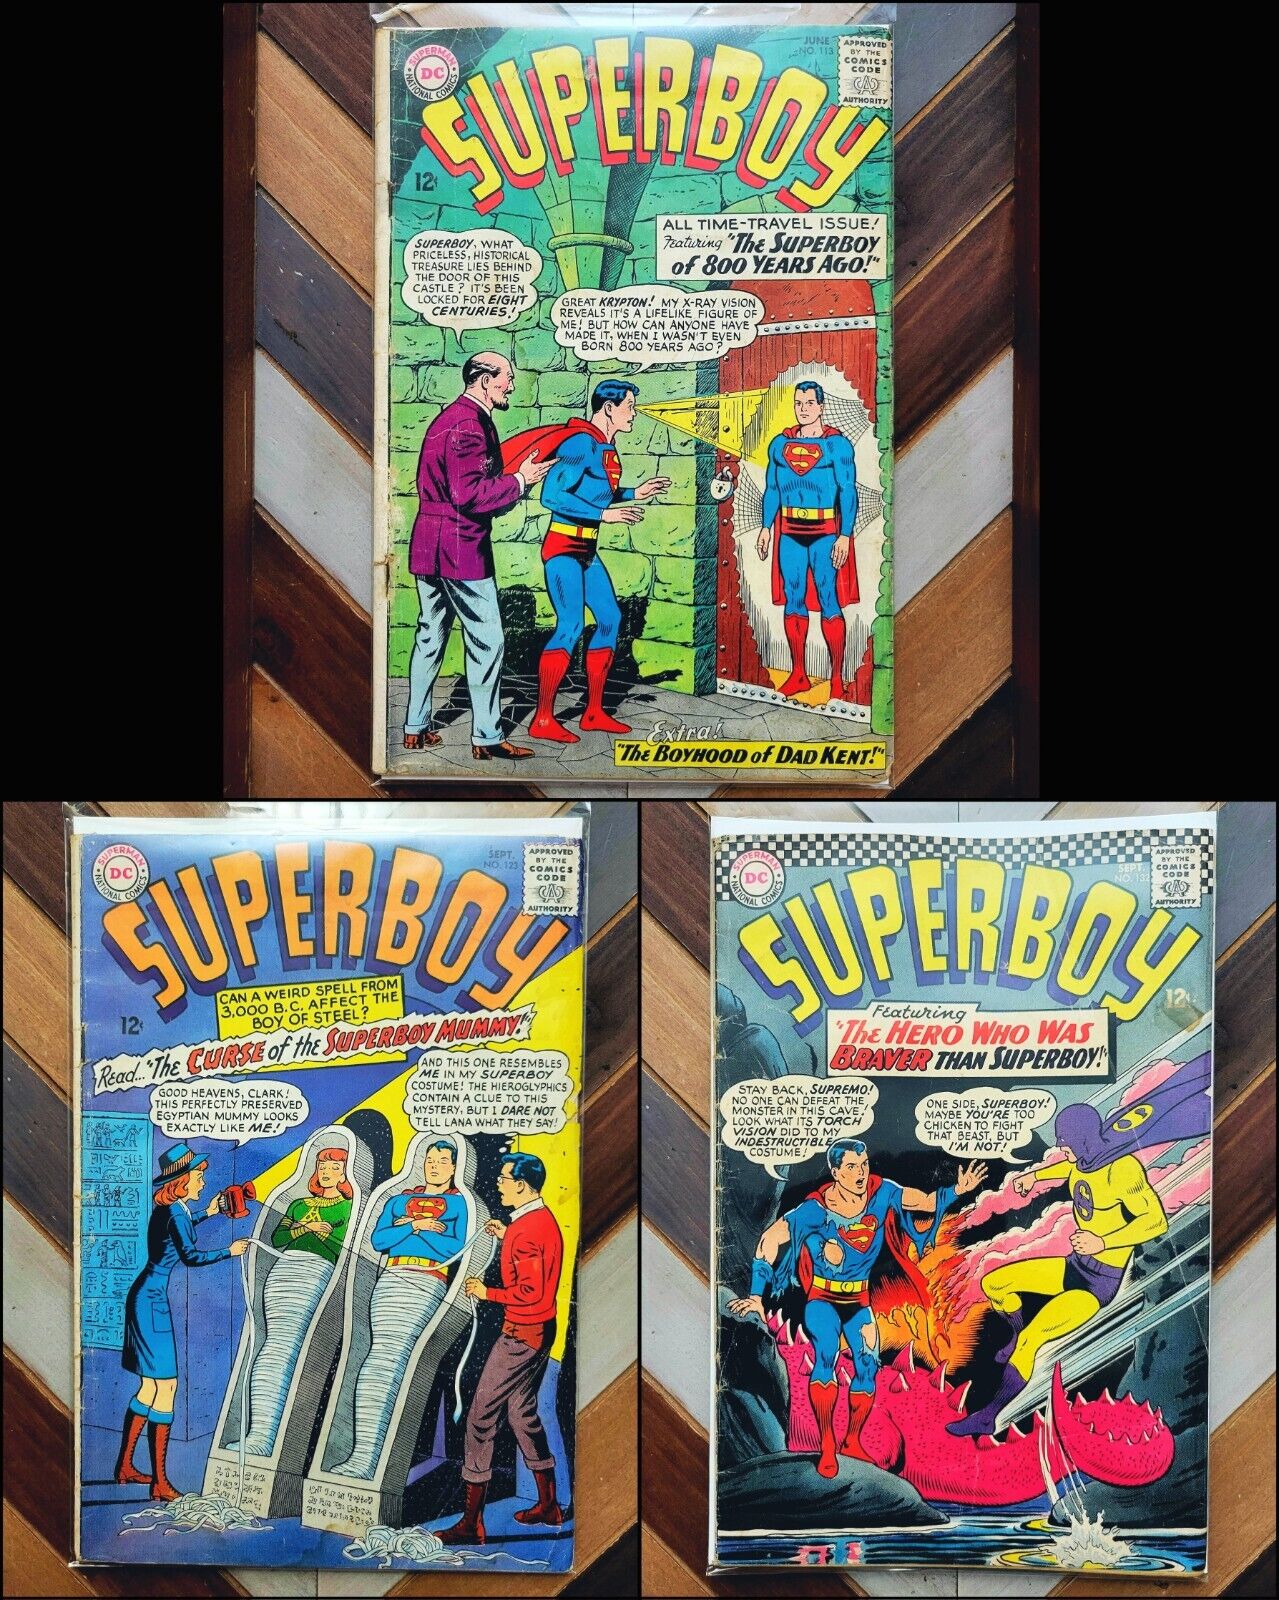 SUPERBOY #113 123 132 (DC 1964-66) Silver Age Covers By Curt Swan & George Klein